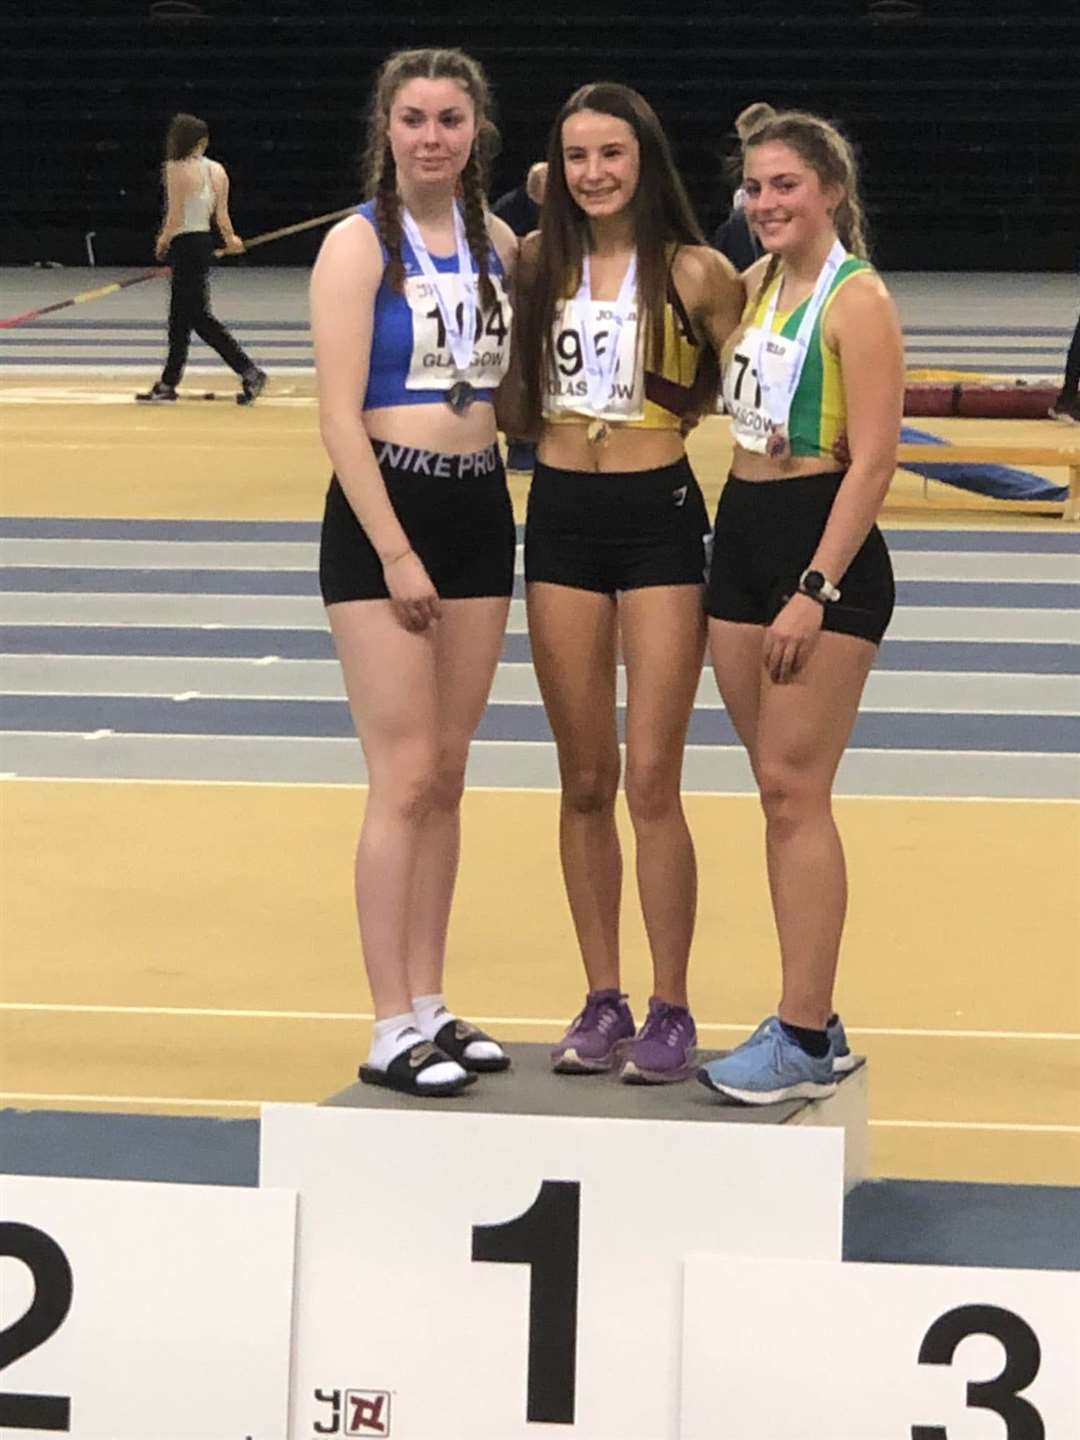 Inverness Harrier Stroma Fraser (centre) won a gold medal at the Indoor National Combined Events Championships in January 2022.